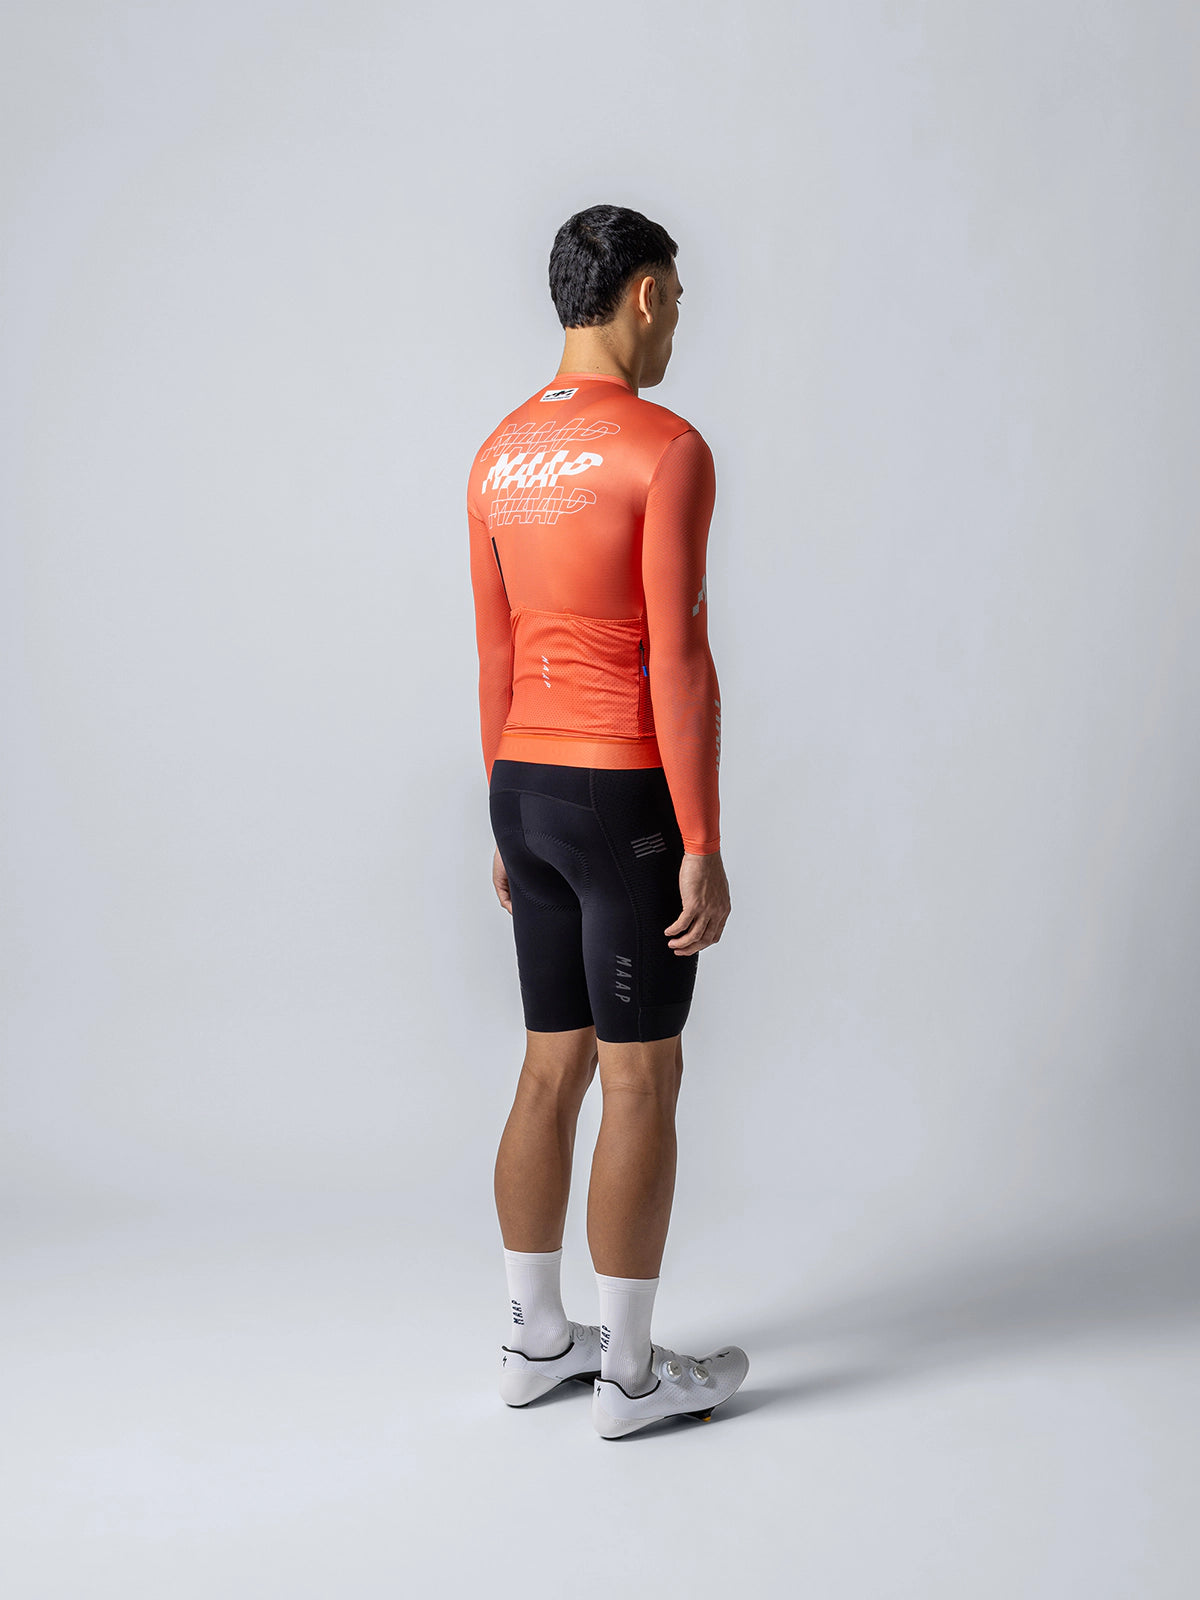 MAAP Fragment Pro Air LS Jersey 2.0 Flame メンズ サイクルジャージ | CYCLISM